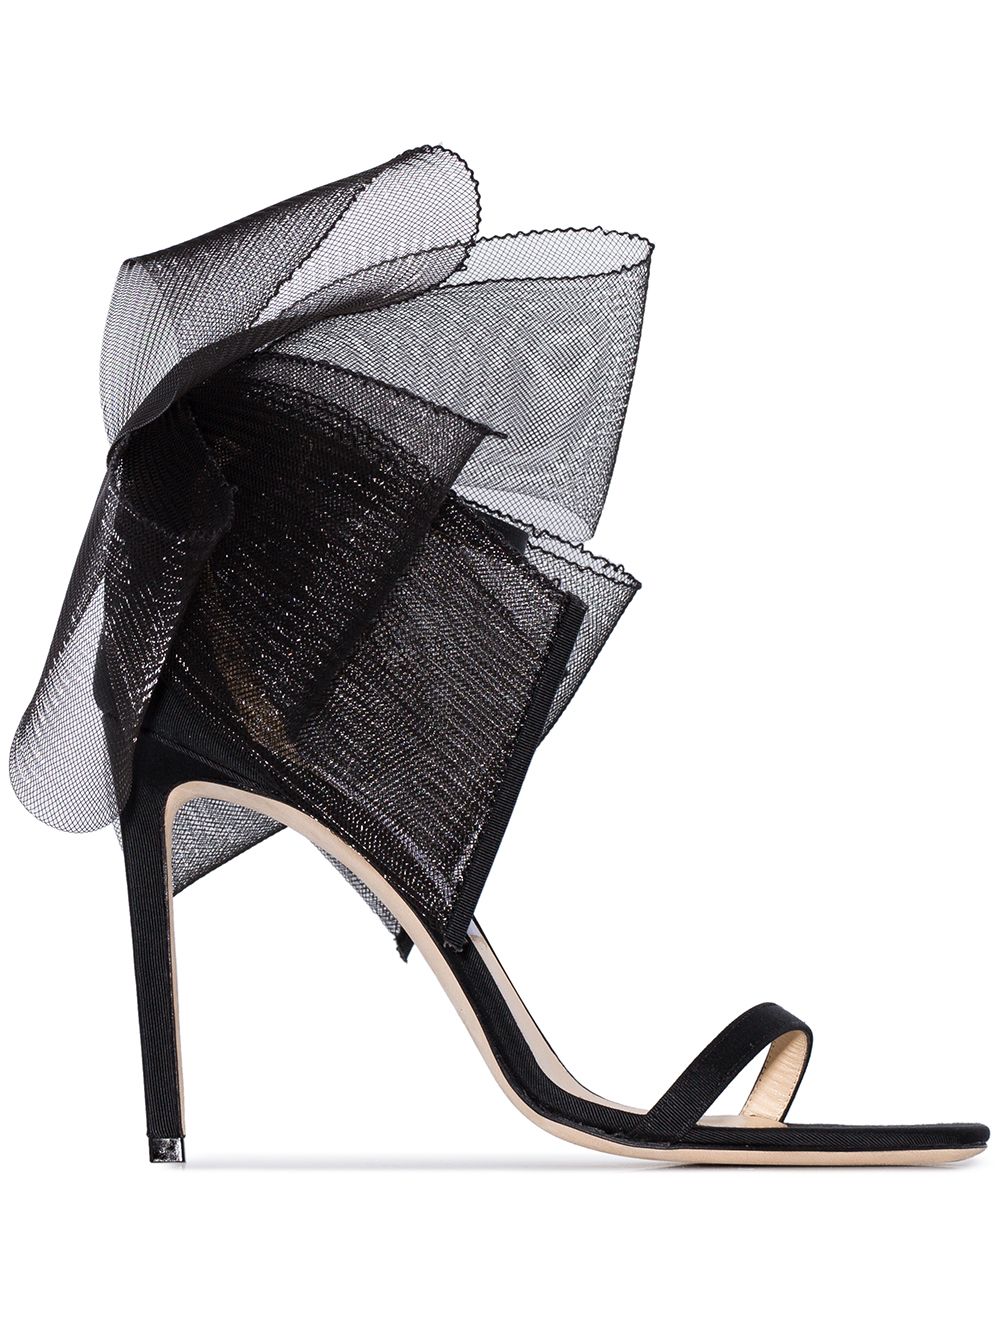 Image 1 of Jimmy Choo Aveline bow detail sandals